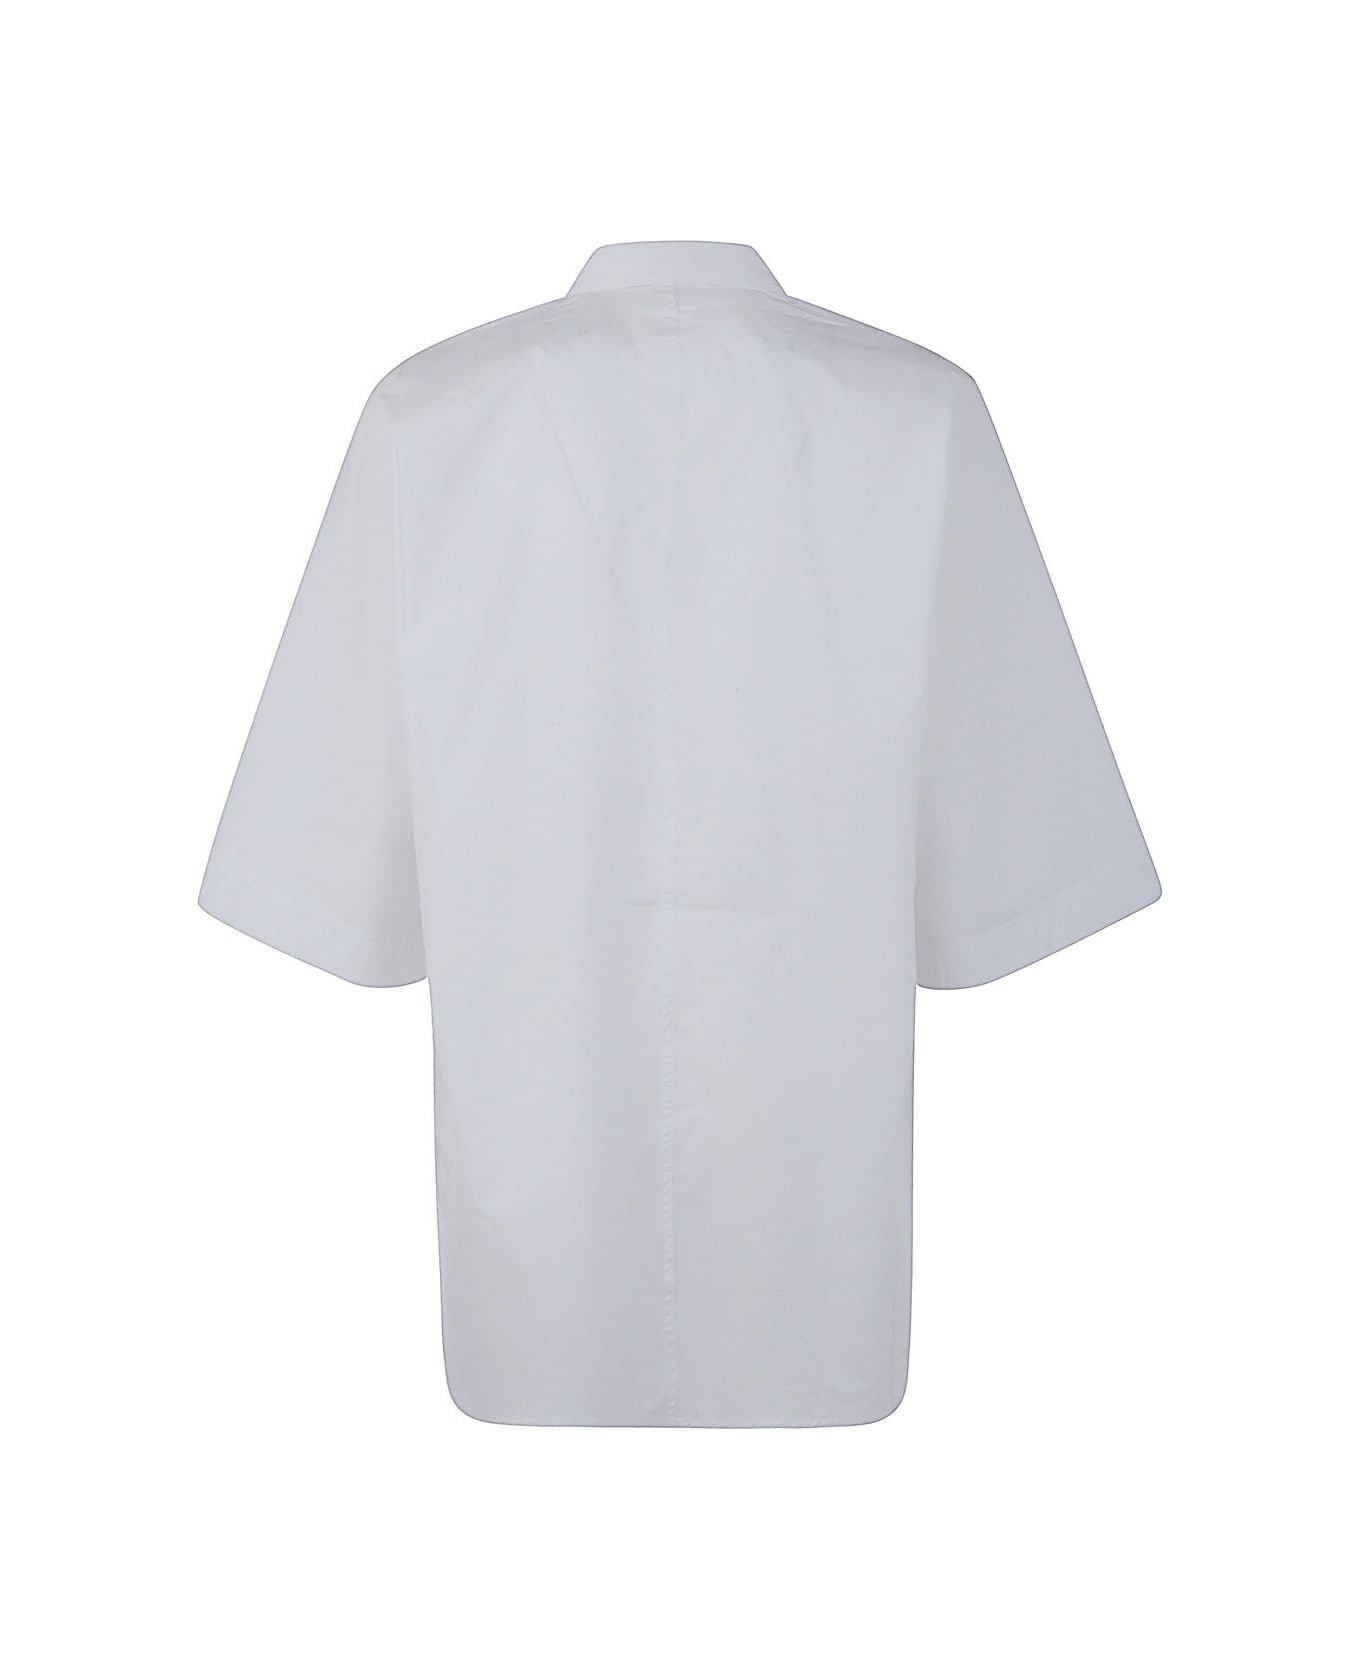 Sofie d'Hoore Short Sleeve Shirt With Front Placket - White シャツ